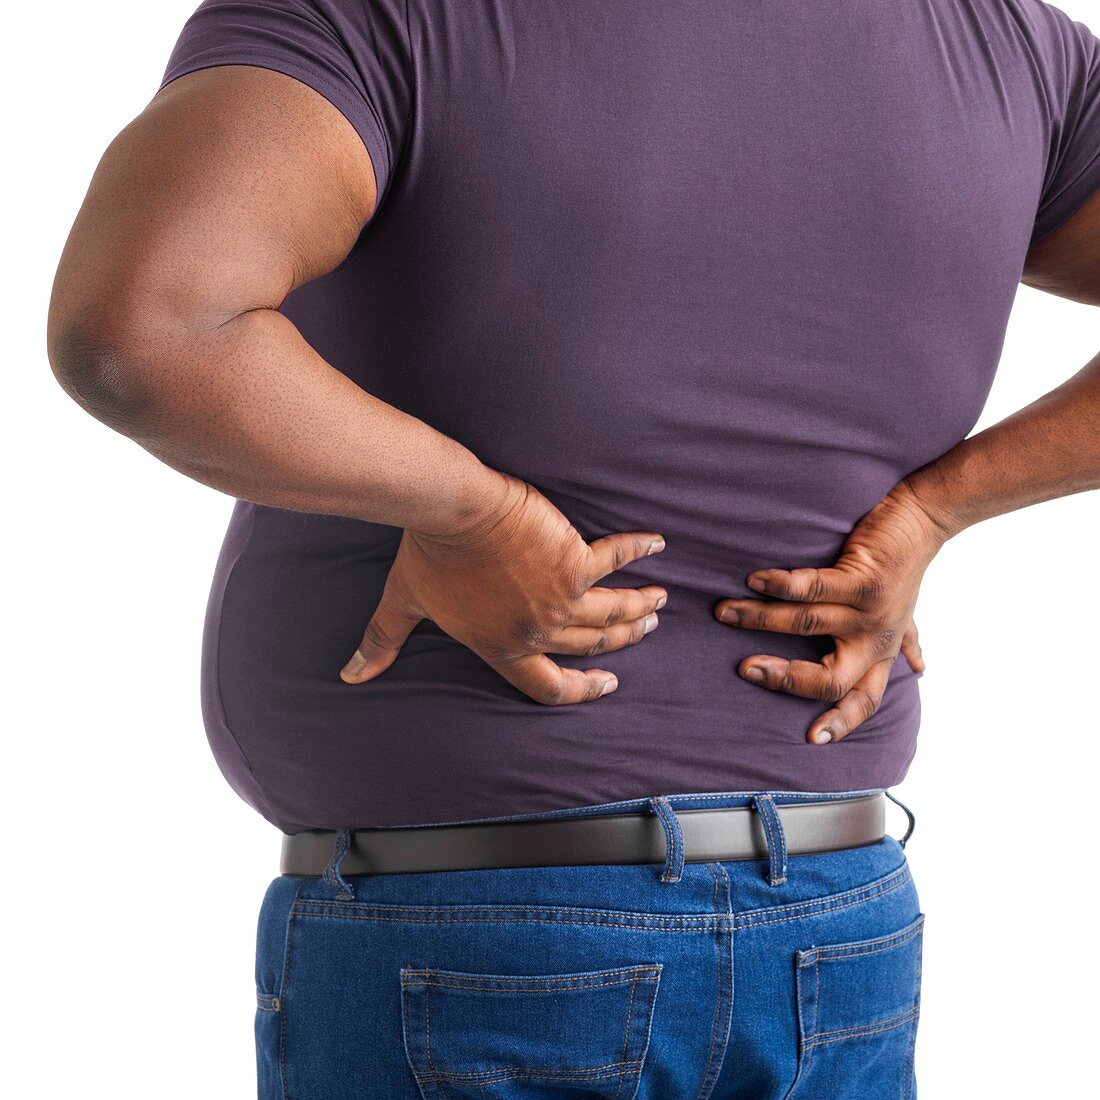 Overweight man with his hands on his back